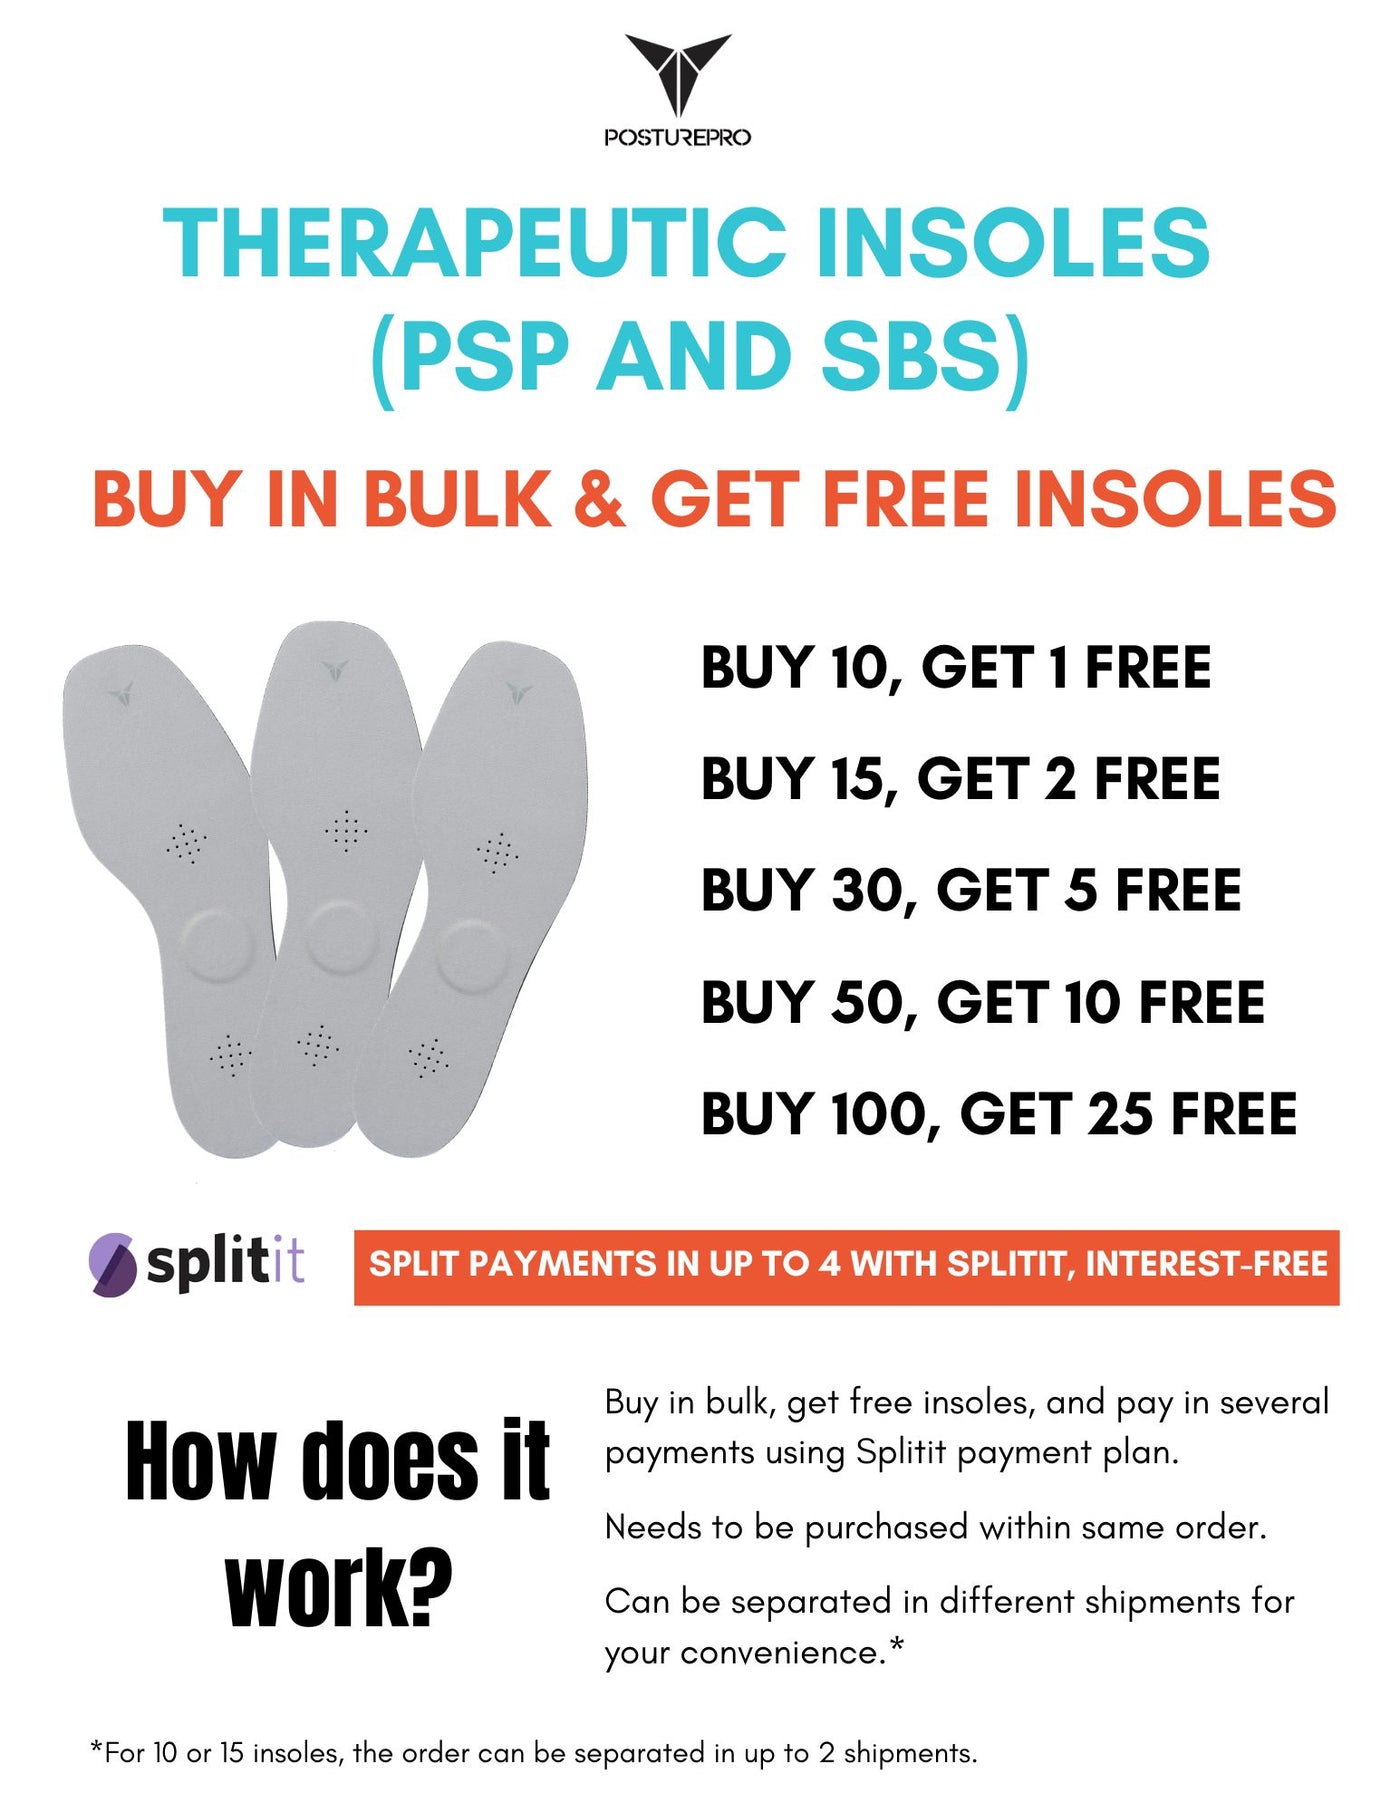 Buy 10 Insoles get 1 FREE